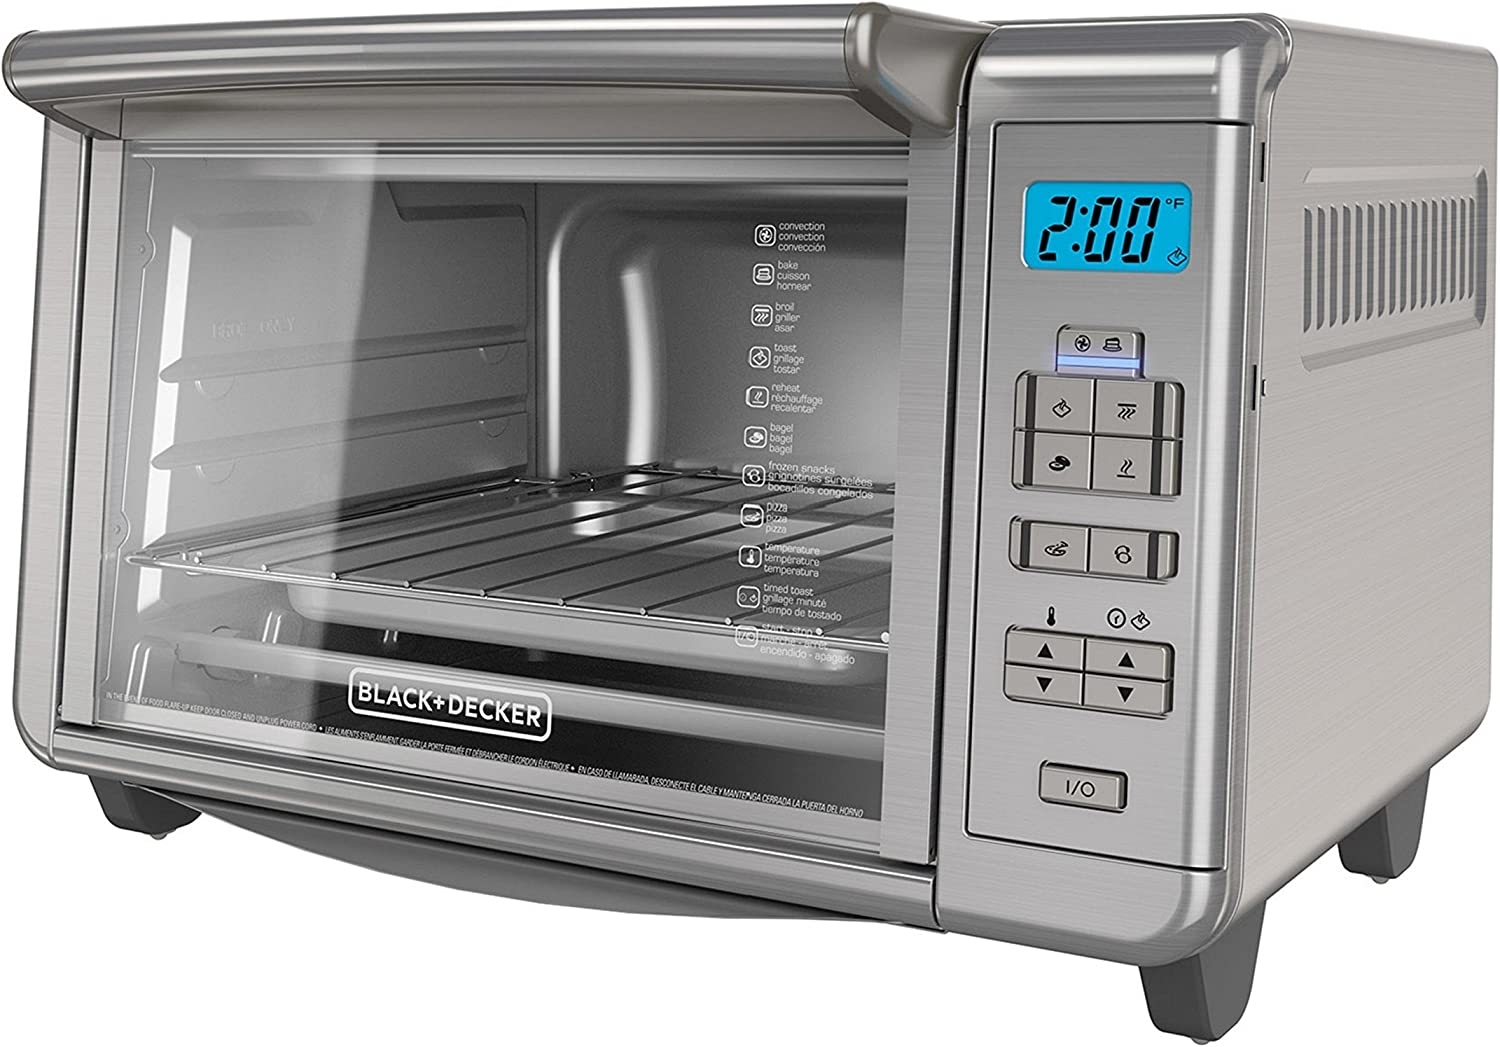 BLACK+DECKER 6-Slice Digital Convection Countertop Toaster Oven, Stainless Steel, TO3280SSD Import To Shop ×Product